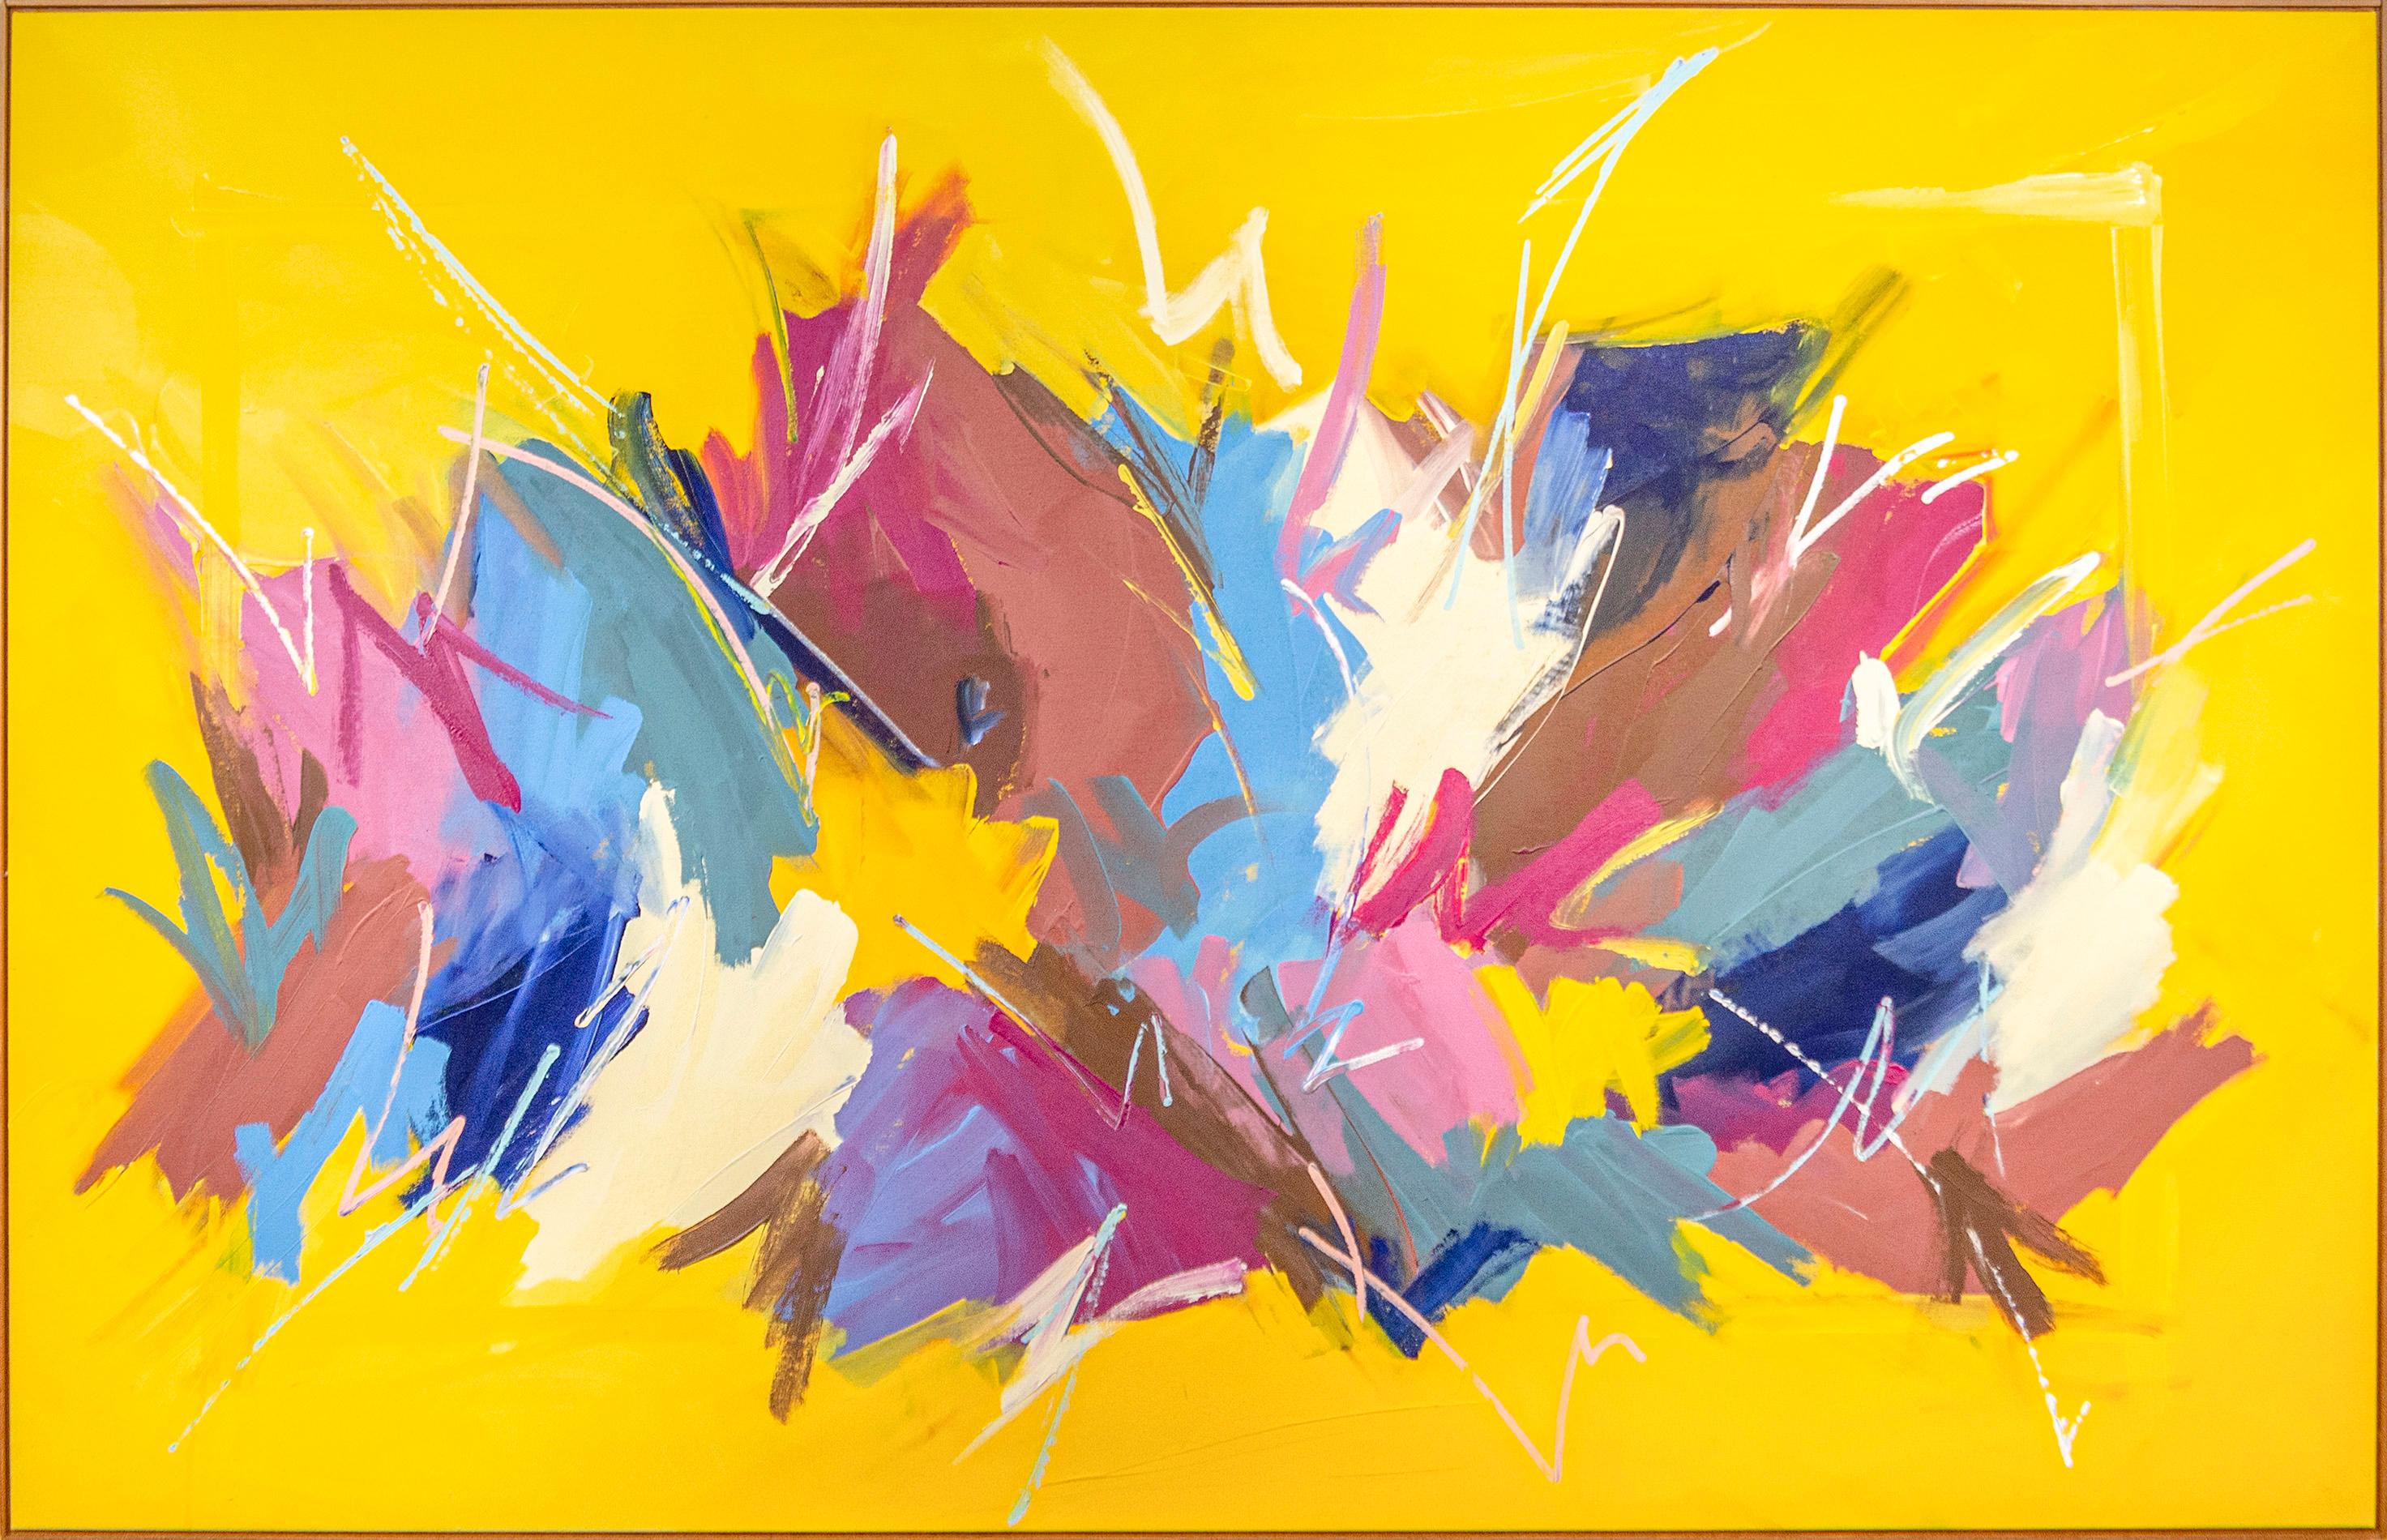 August Yellow Picture - large, colourful, gestural abstract, acrylic on canvas - Painting by Milly Ristvedt